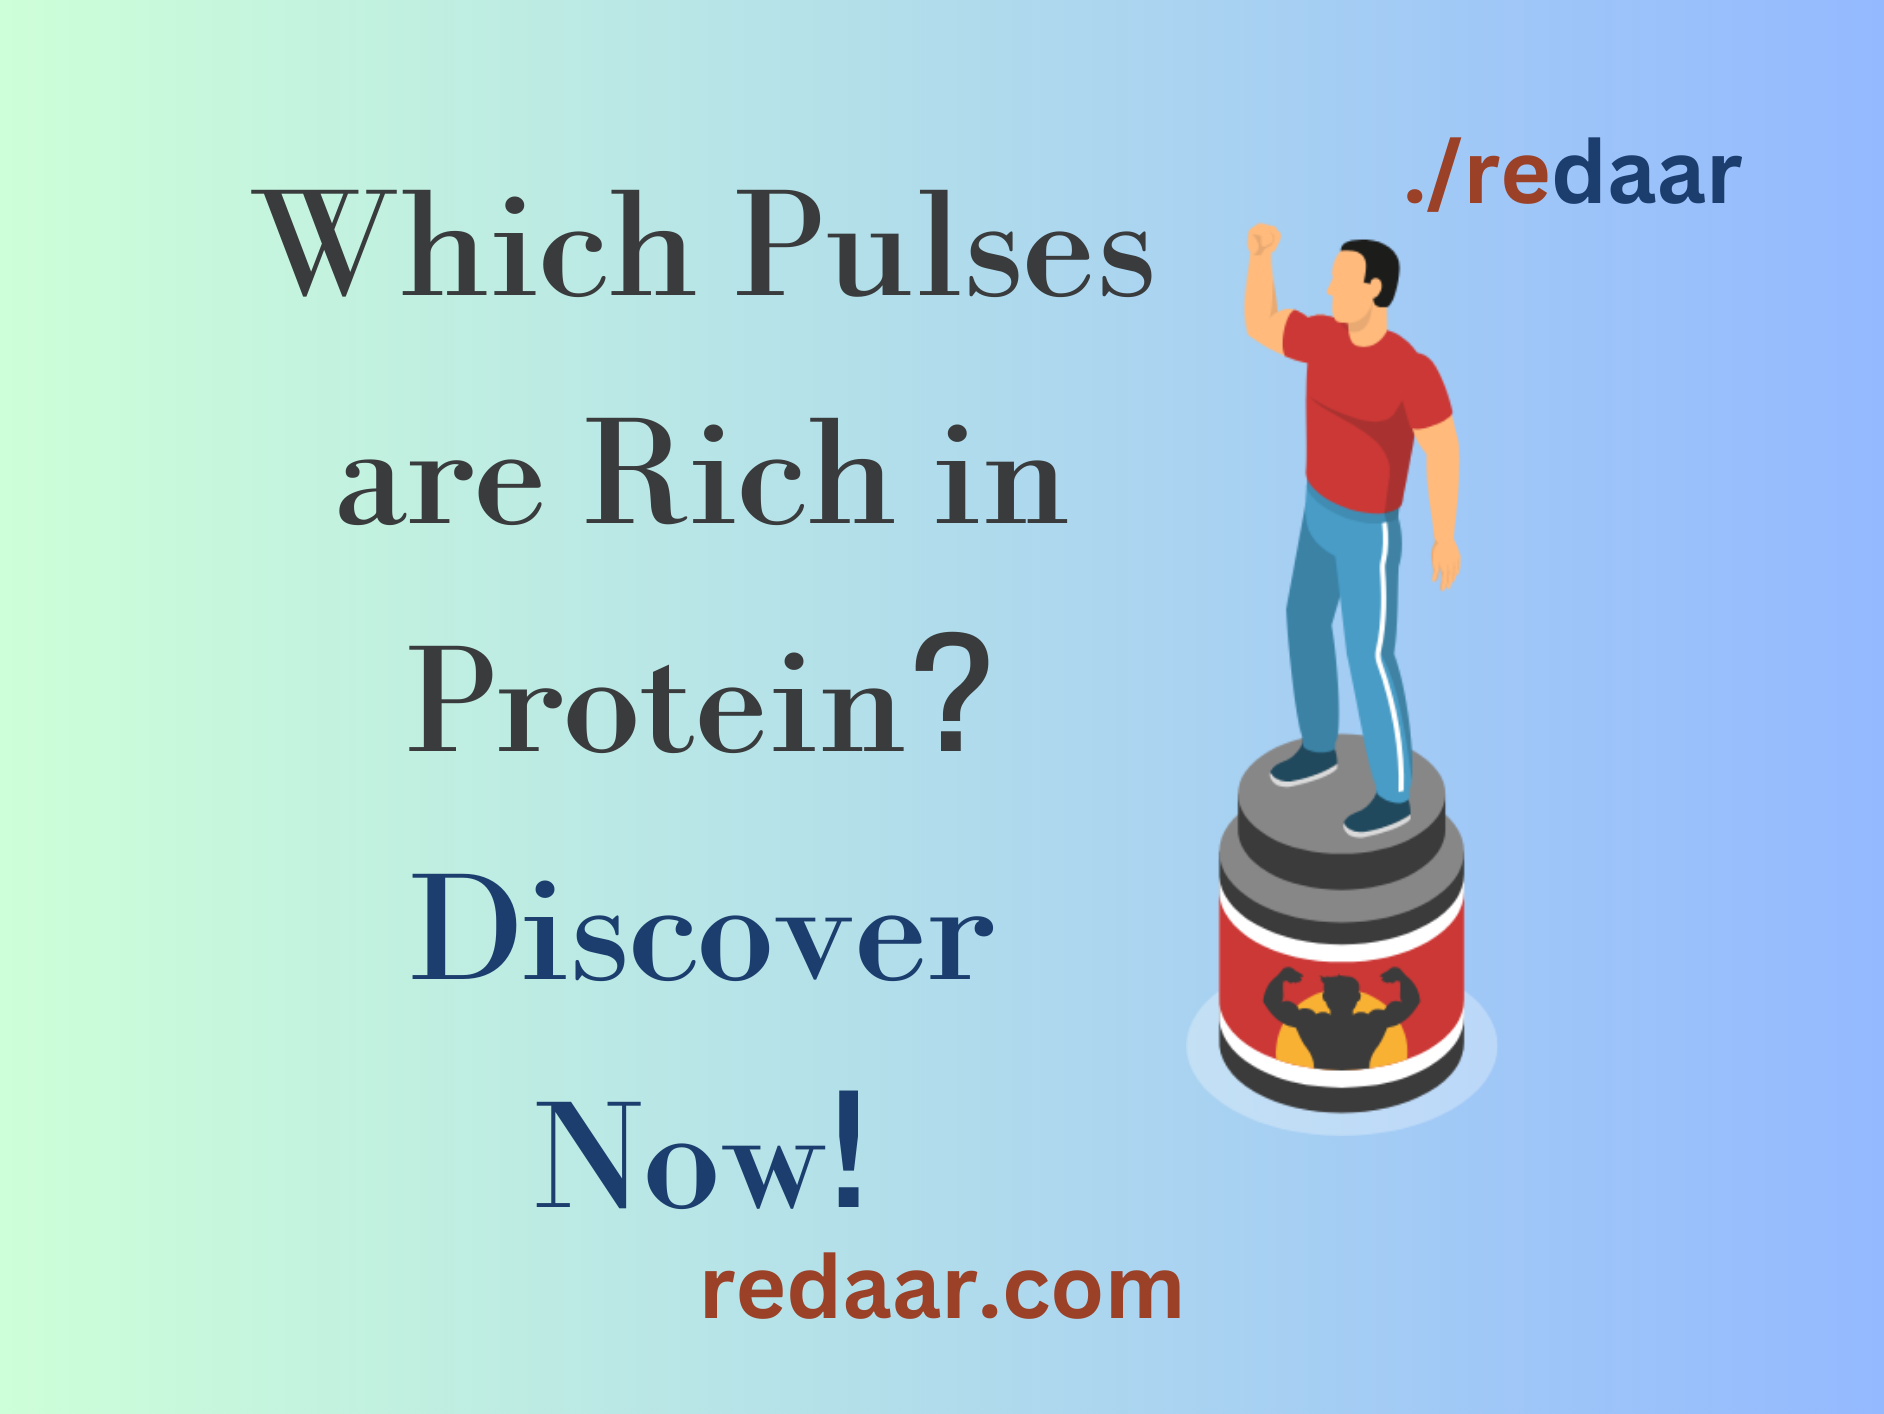 Which Pulses are Rich in Protein? Discover Now!